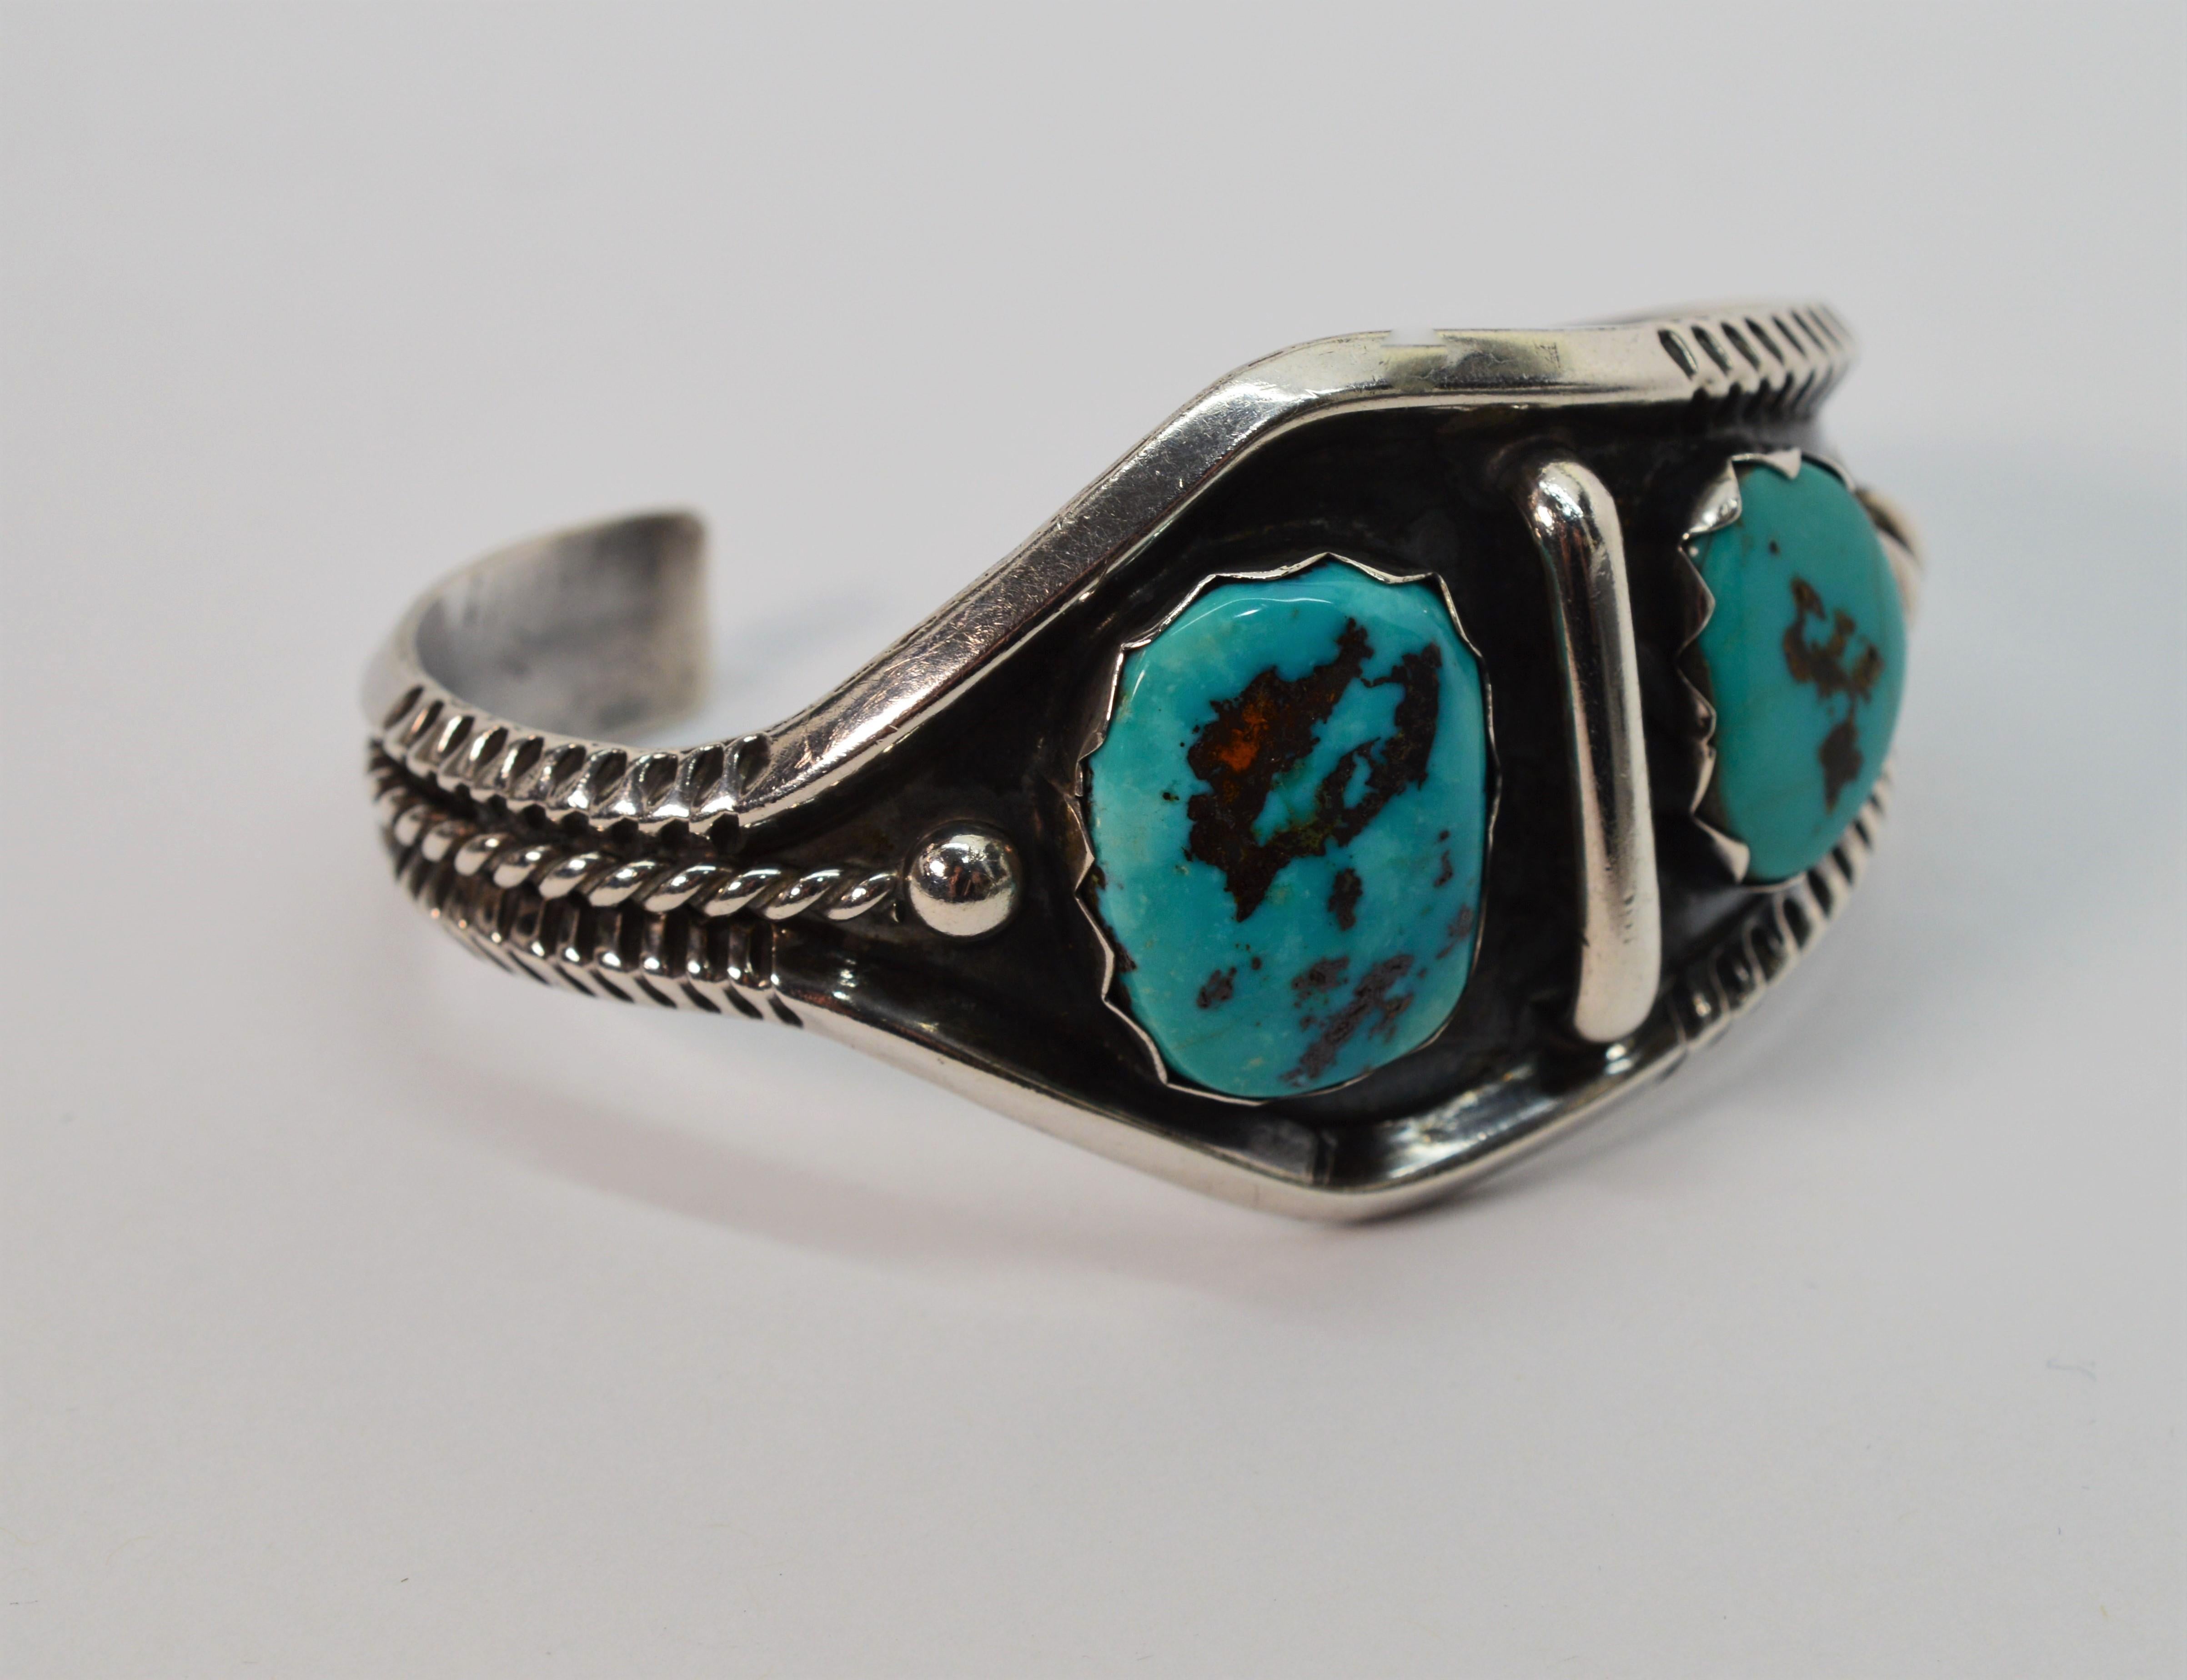 Tumbled Turquoise Sterling Silver Navajo Cuff Bracelet